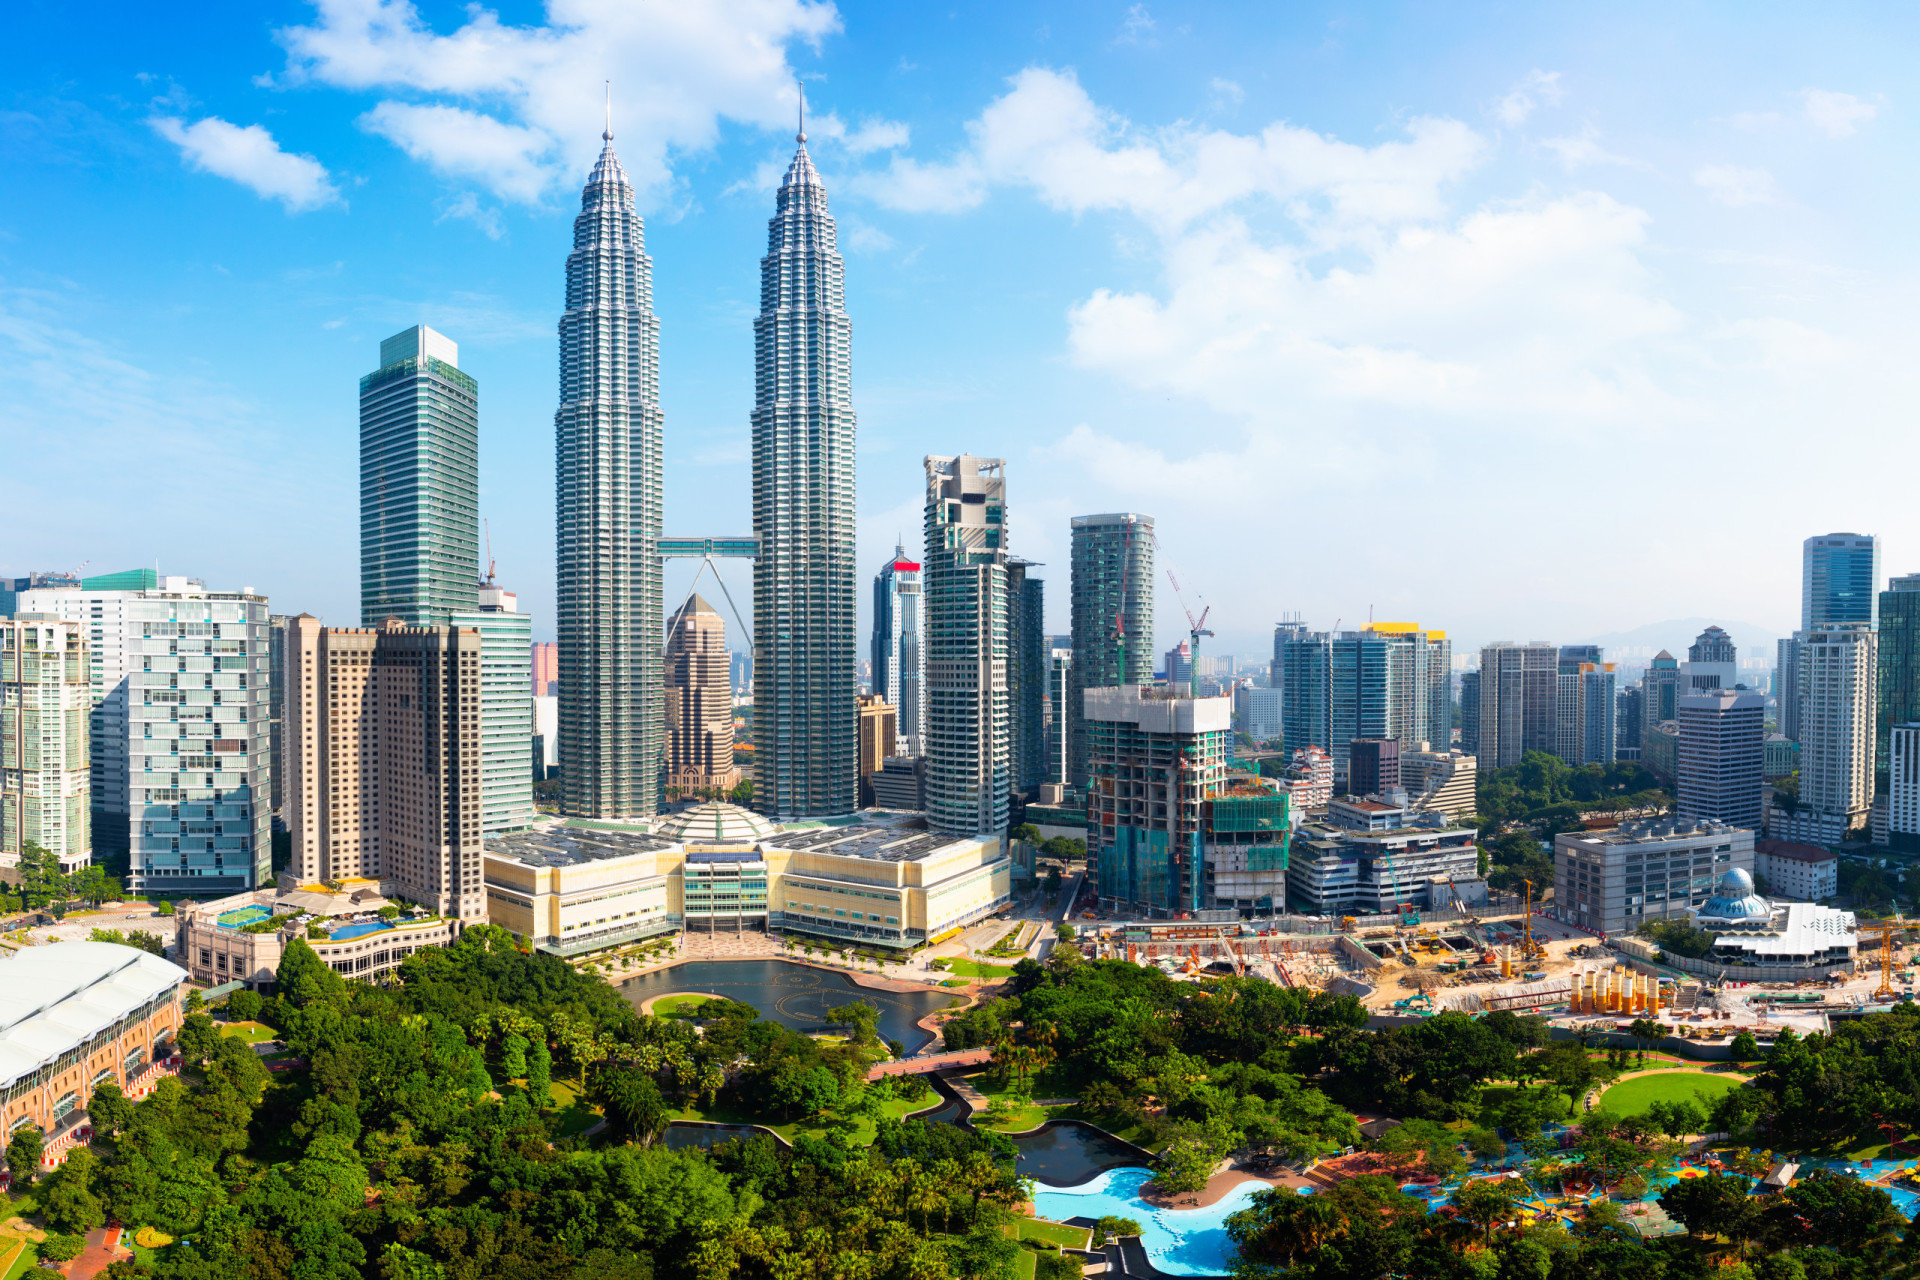 <p>Malaysia has a flat-rate tax that it applies to each night you stay, at around US$4.35 a night.</p><p><a href="https://www.msn.com/en-ph/community/channel/vid-7xx8mnucu55yw63we9va2gwr7uihbxwc68fxqp25x6tg4ftibpra?cvid=94631541bc0f4f89bfd59158d696ad7e">Follow us and access great exclusive content every day</a></p>